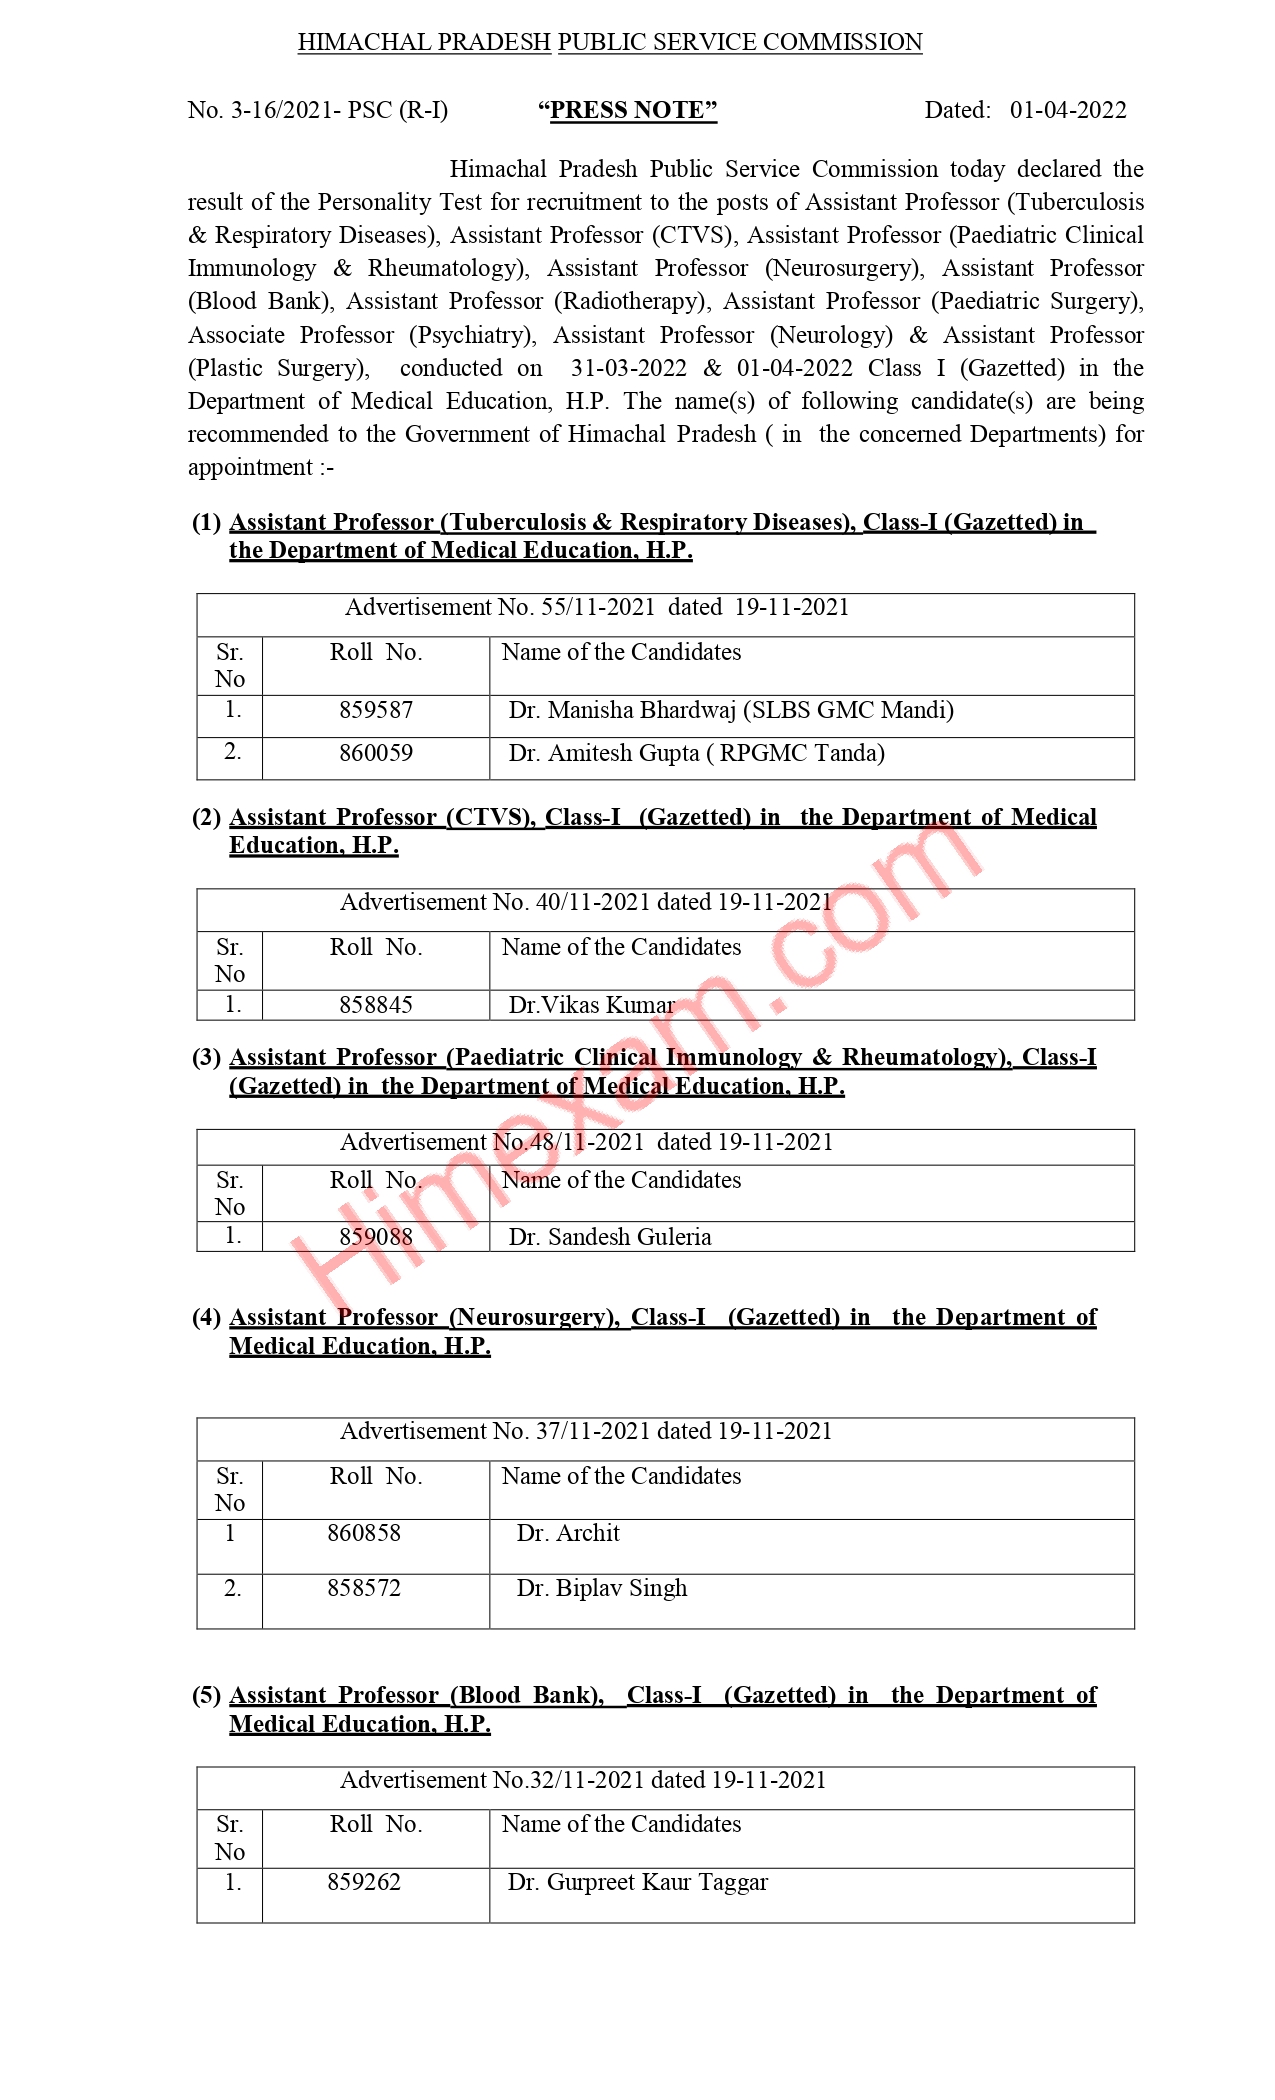 Regarding Result of the Personality Test for Various Posts of Assistant Professor conducted on 31-03-2022 & 01-04-2022 in the Department of Medical Education-HPPSC Shimla